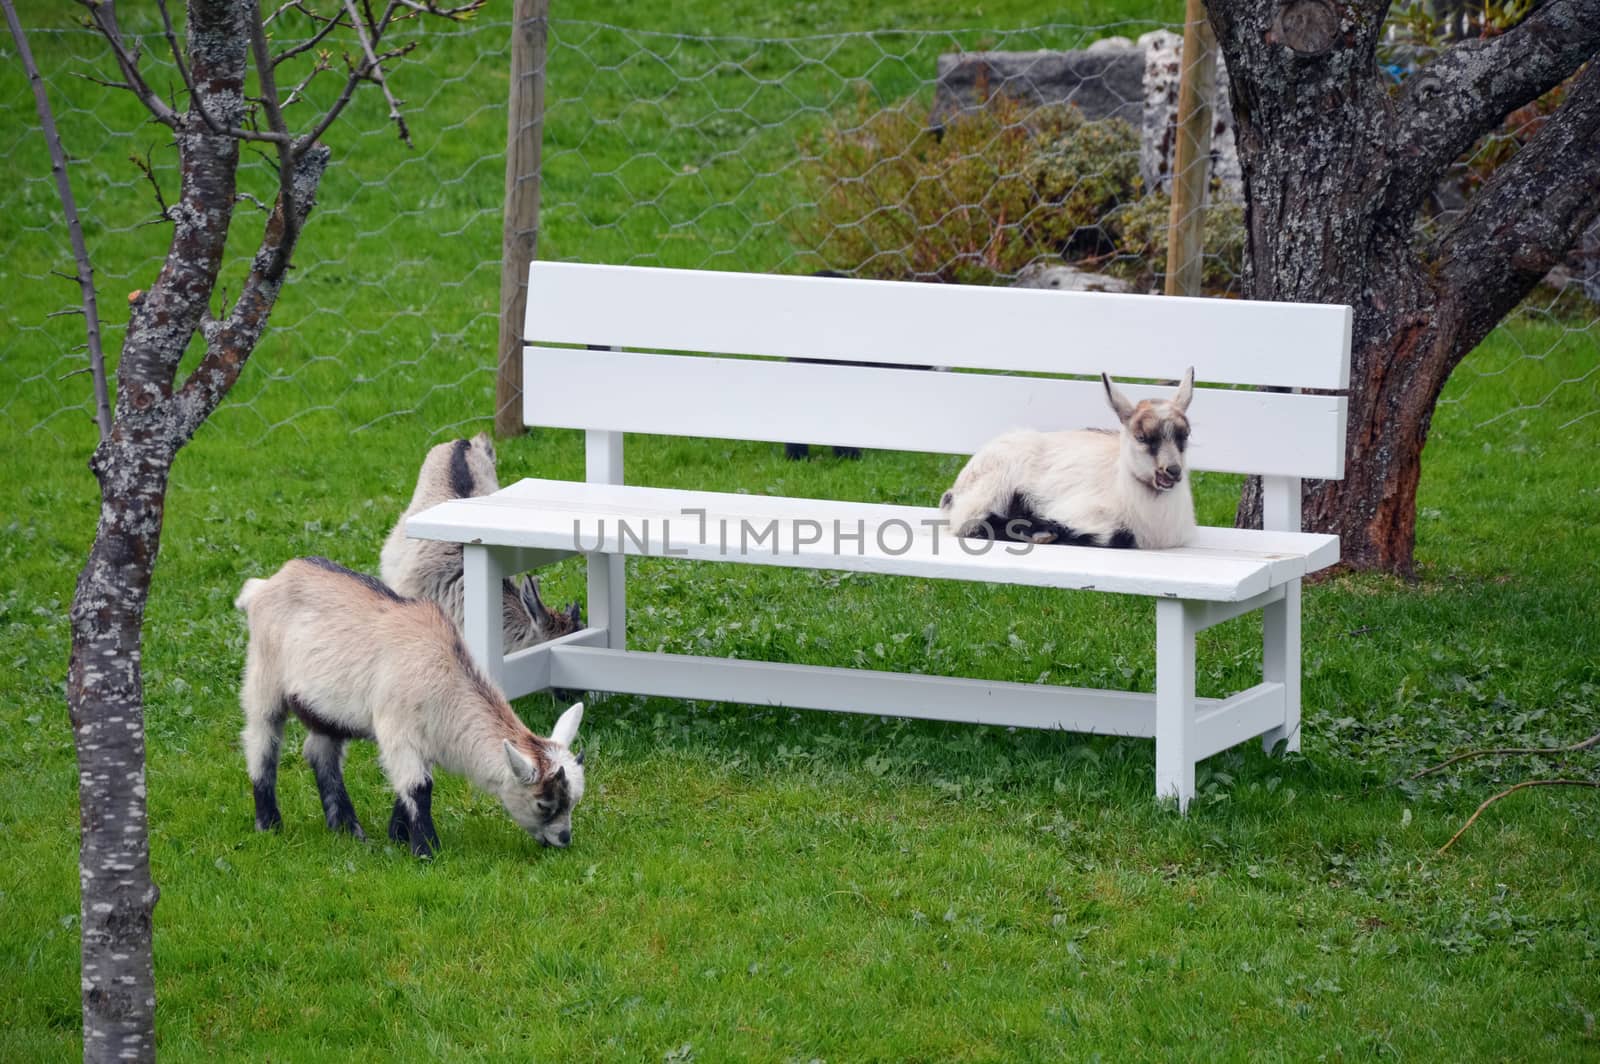 Bench and sheep on a green pasture - flam norway spring